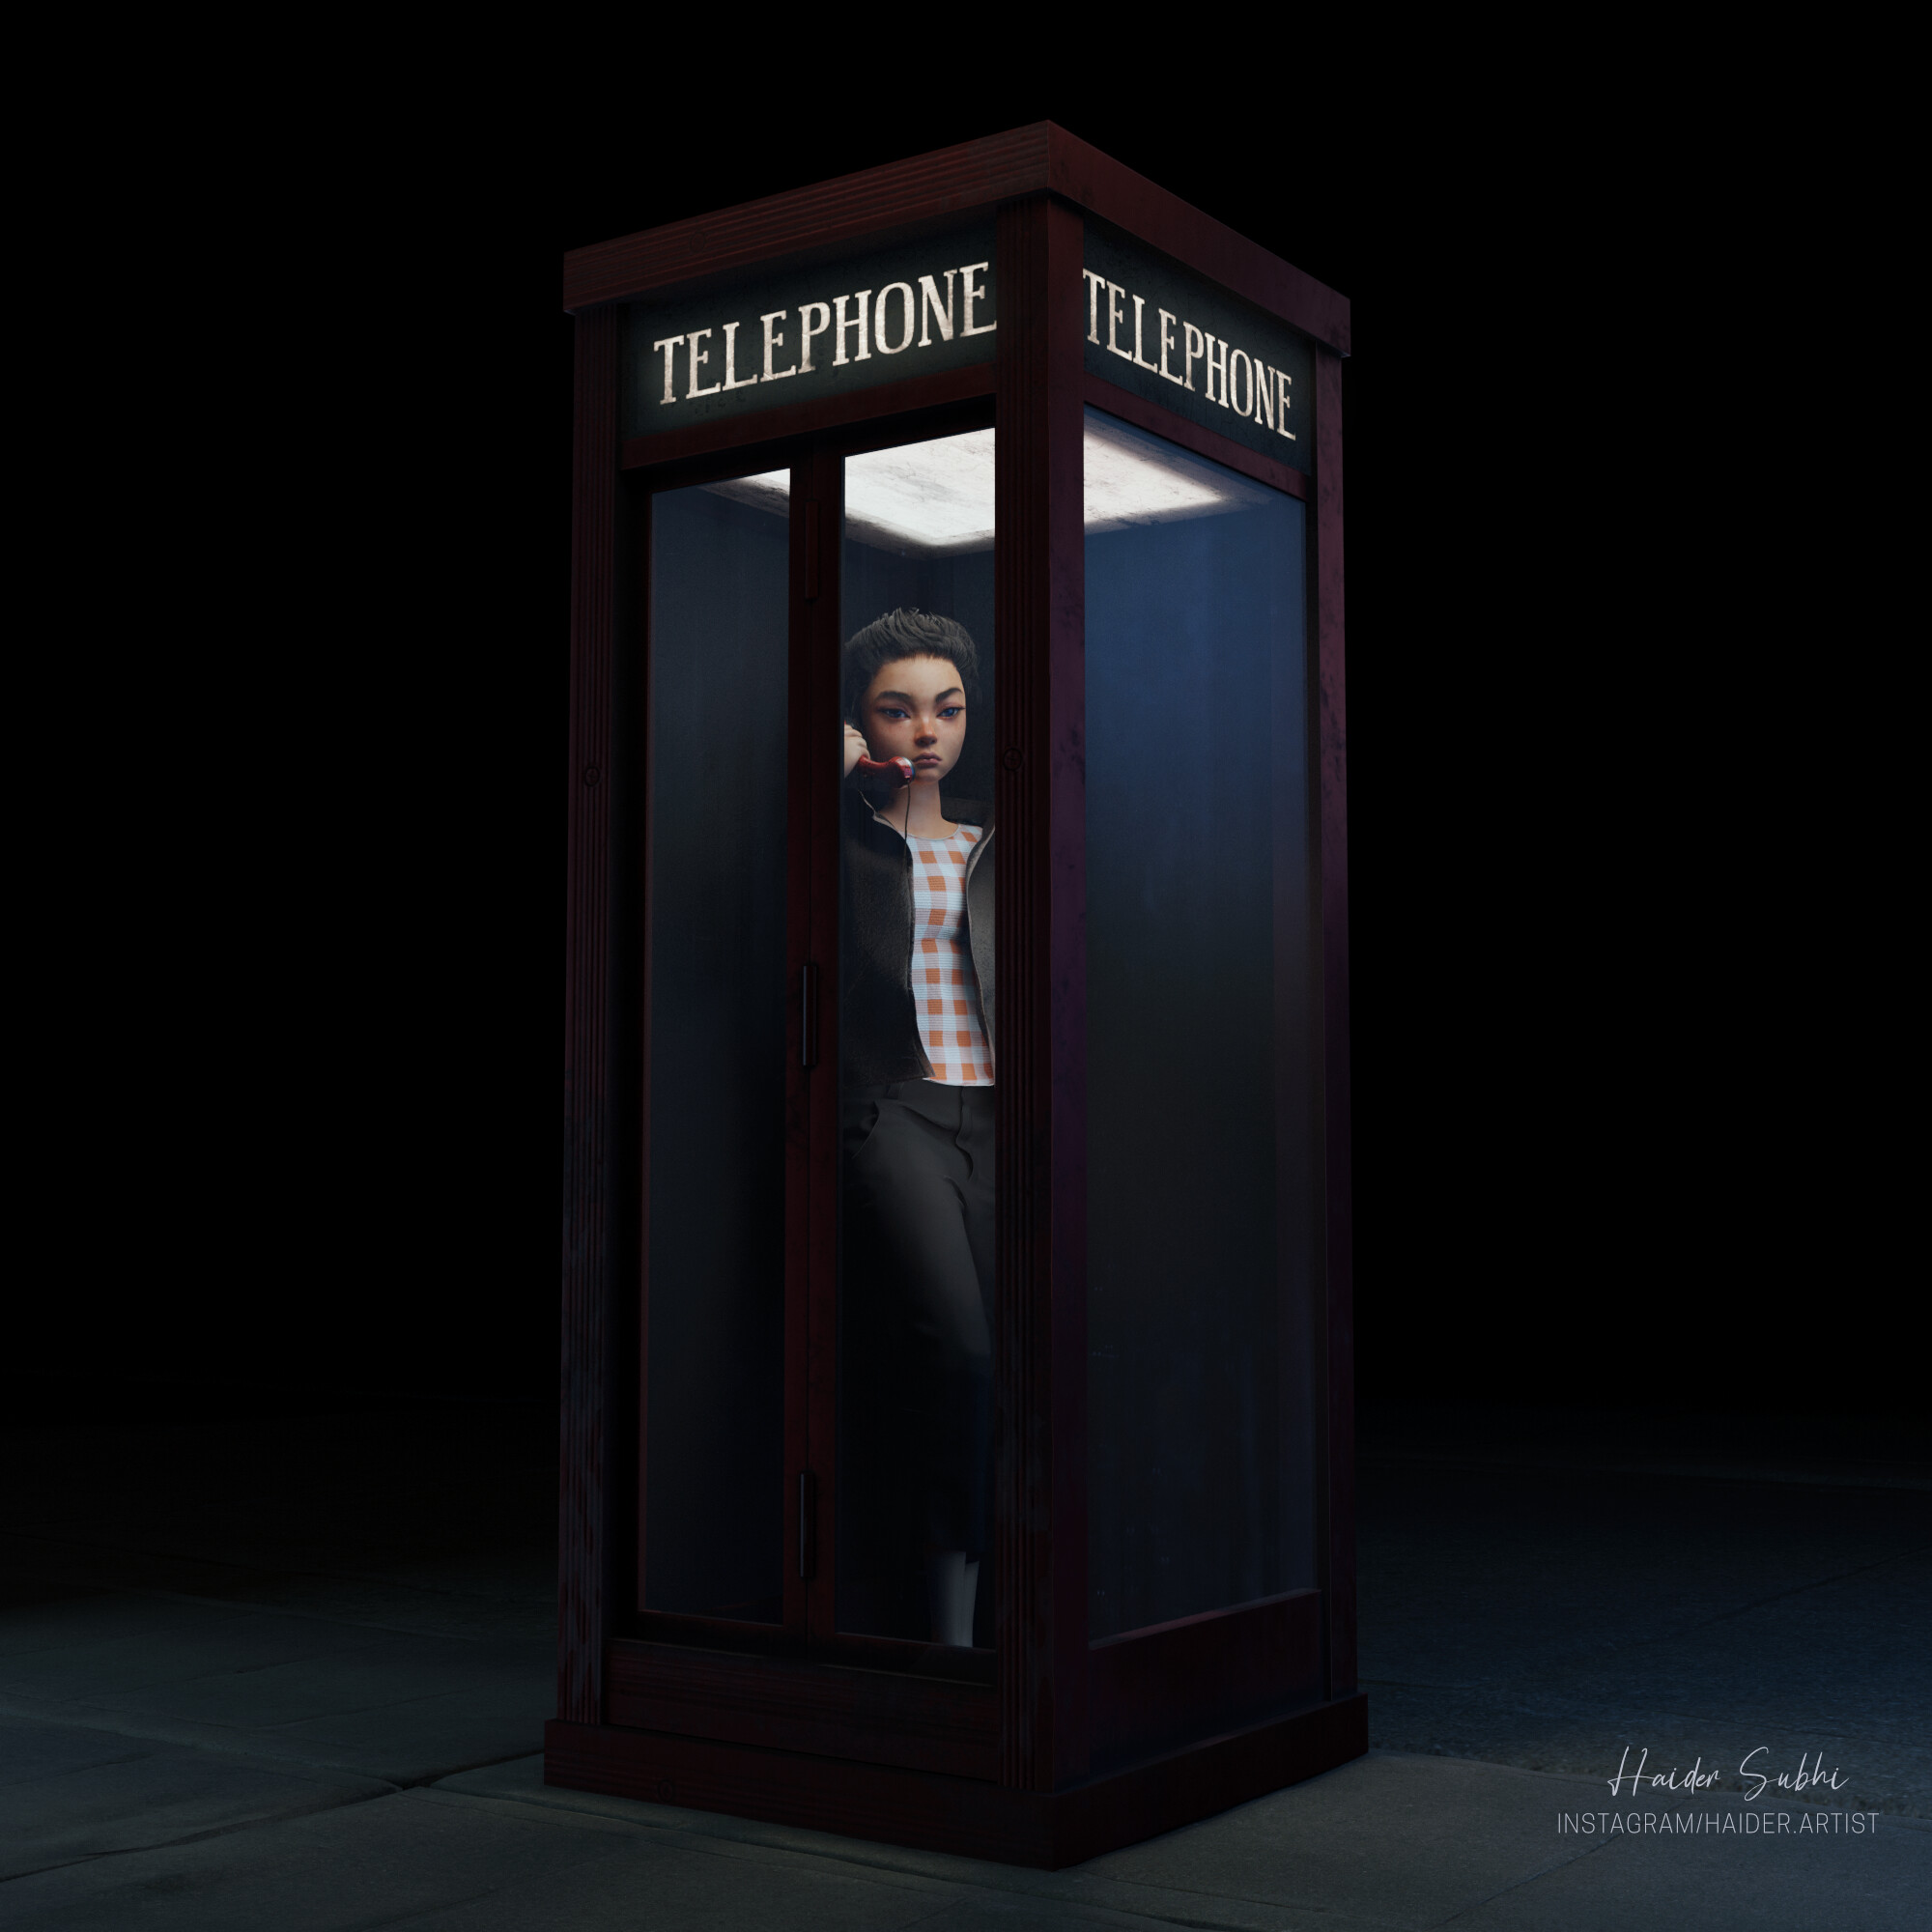 Late night phone call - Finished Projects - Blender Artists Community